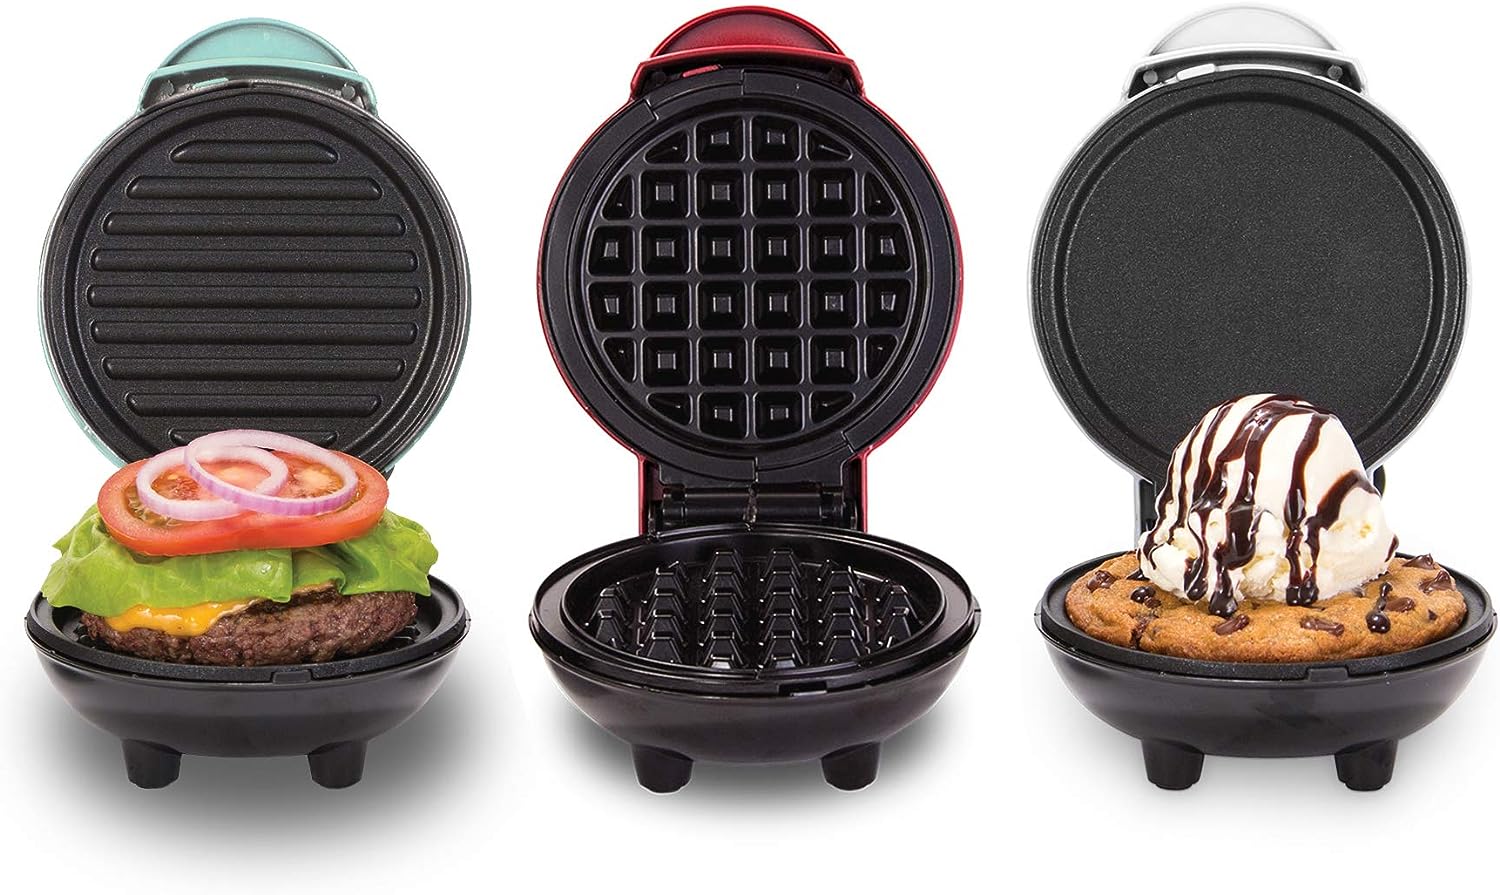  DASH Mini Maker Electric Round Griddle for Individual